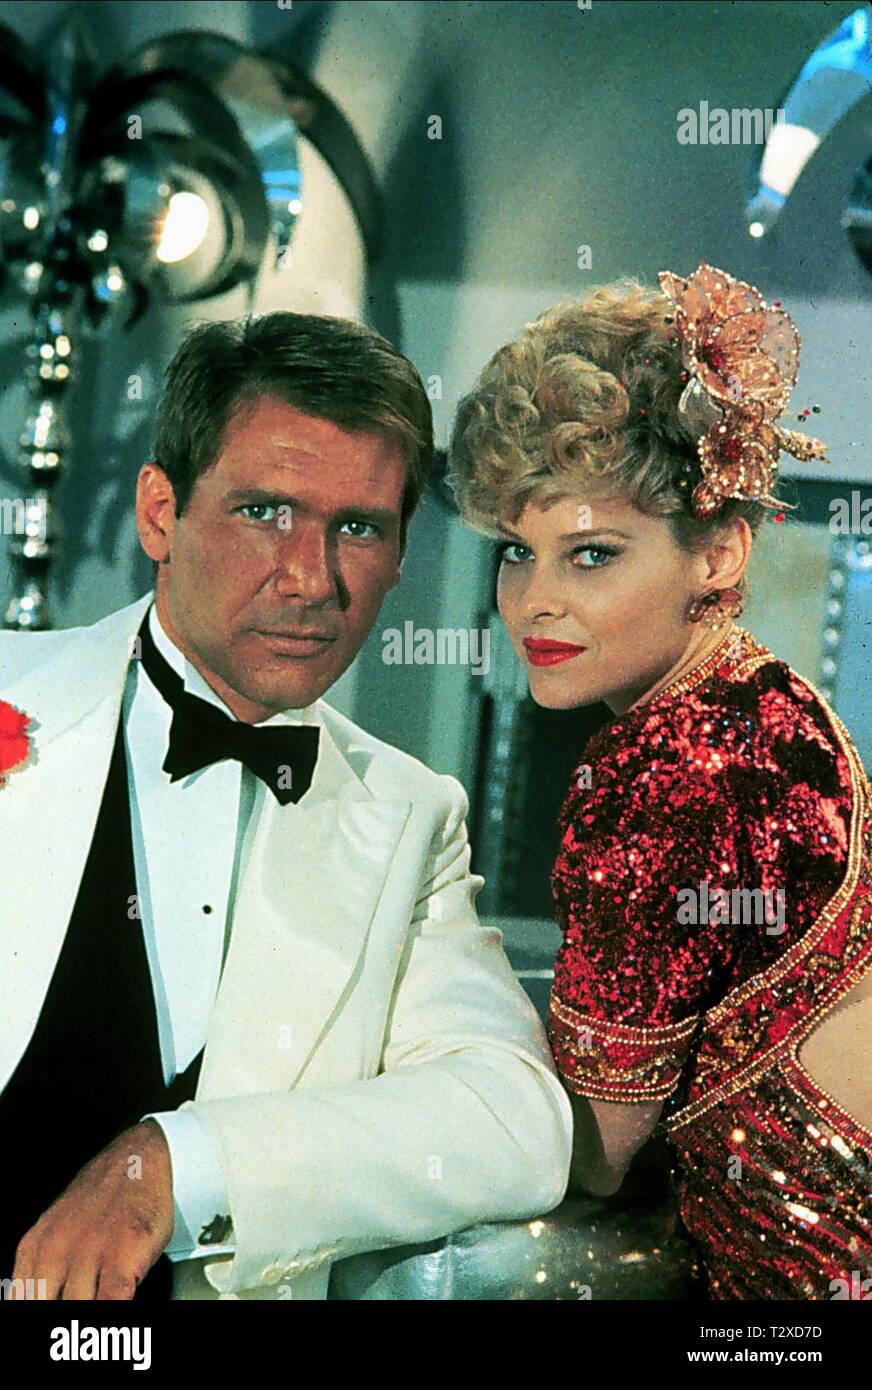 Skære af virtuel Blive ved HARRISON FORD, KATE CAPSHAW, INDIANA JONES AND THE TEMPLE OF DOOM, 1984  Stock Photo - Alamy